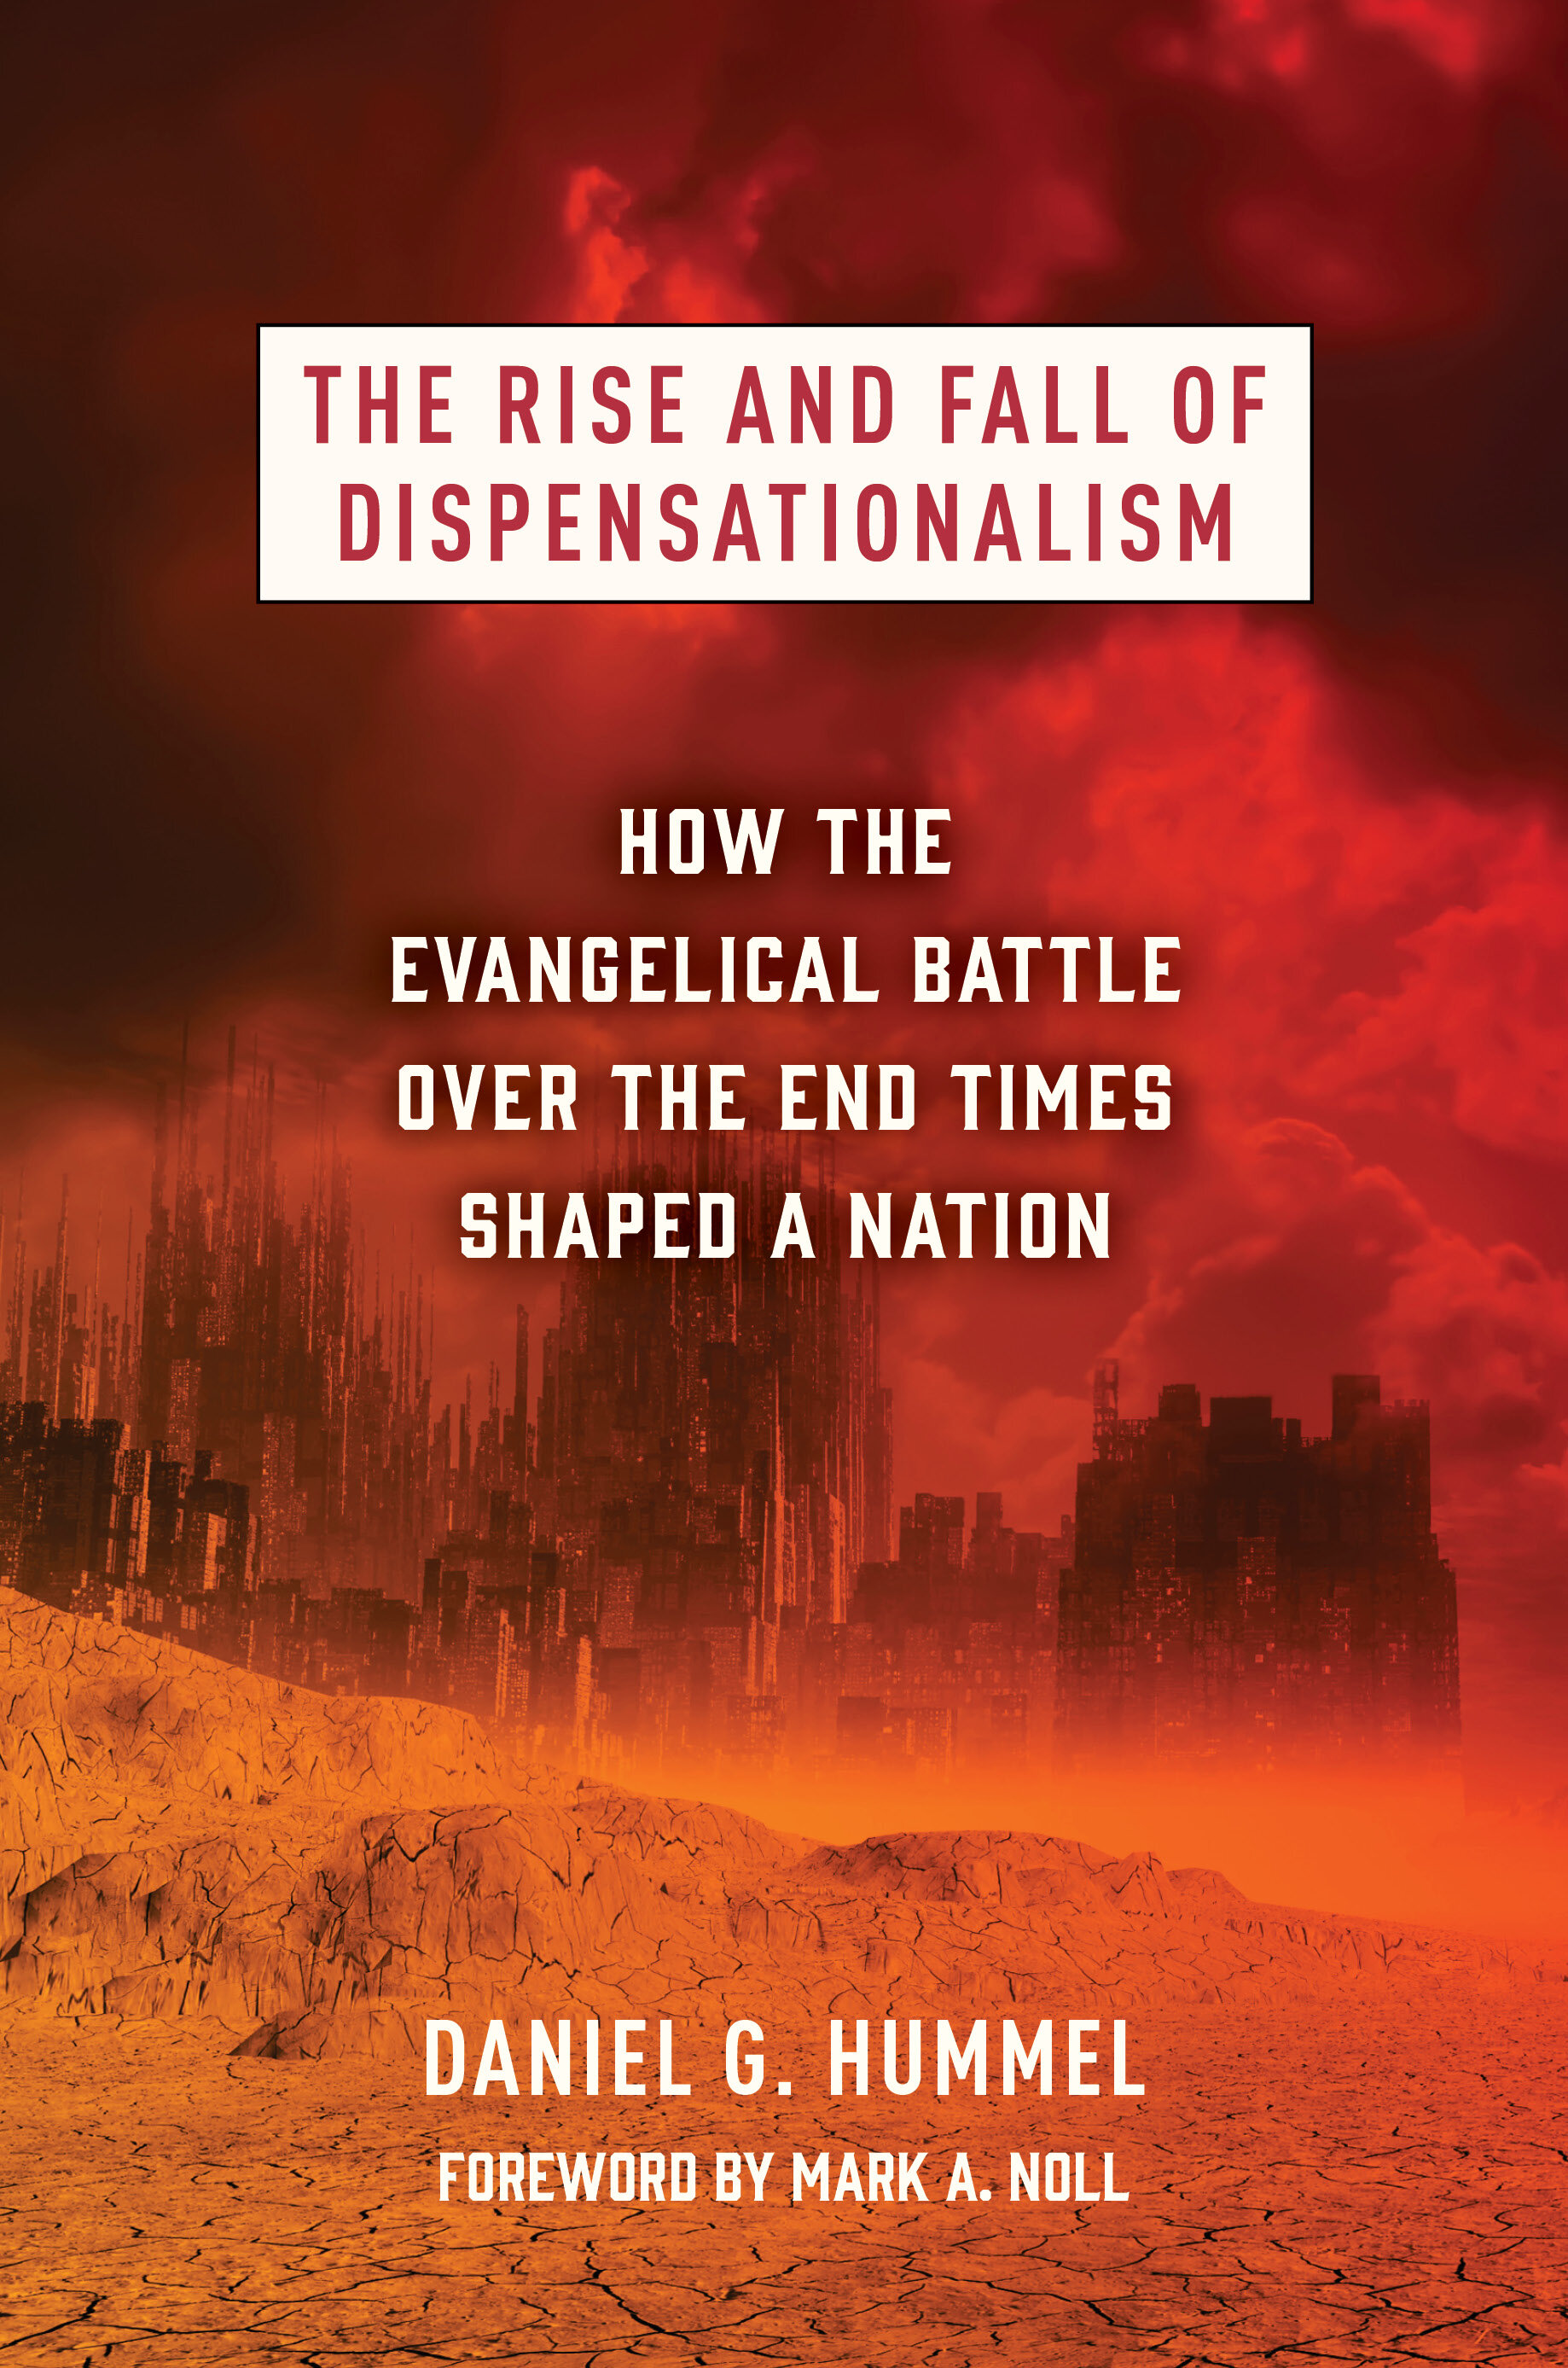 The Rise and Fall of Dispensationalism: How the Evangelical Battle over the End Times Shaped a Nation